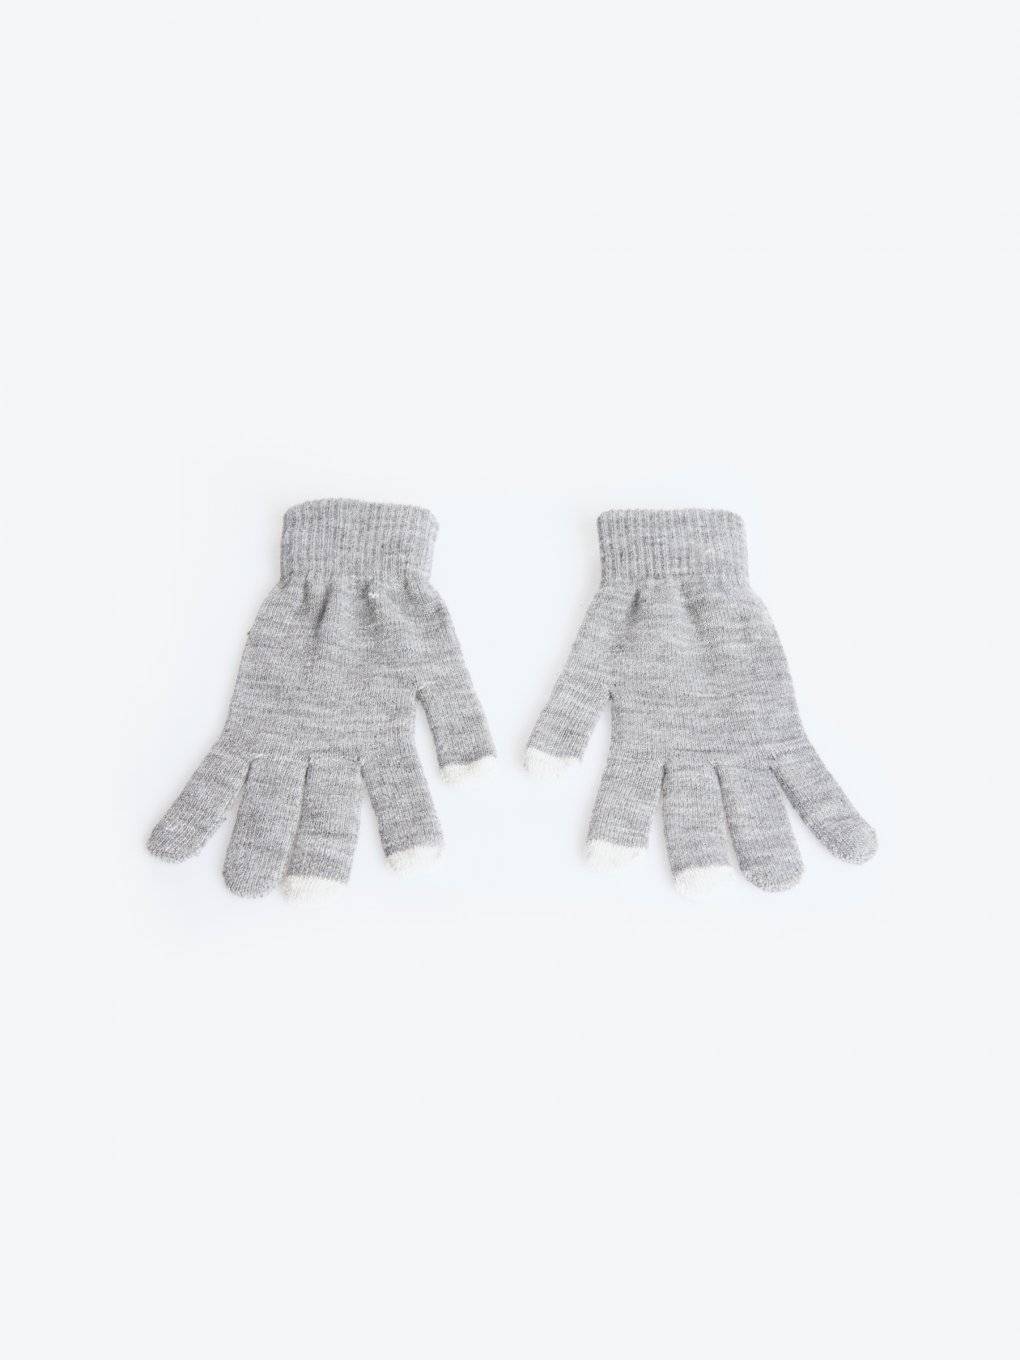 Basic touch screen gloves